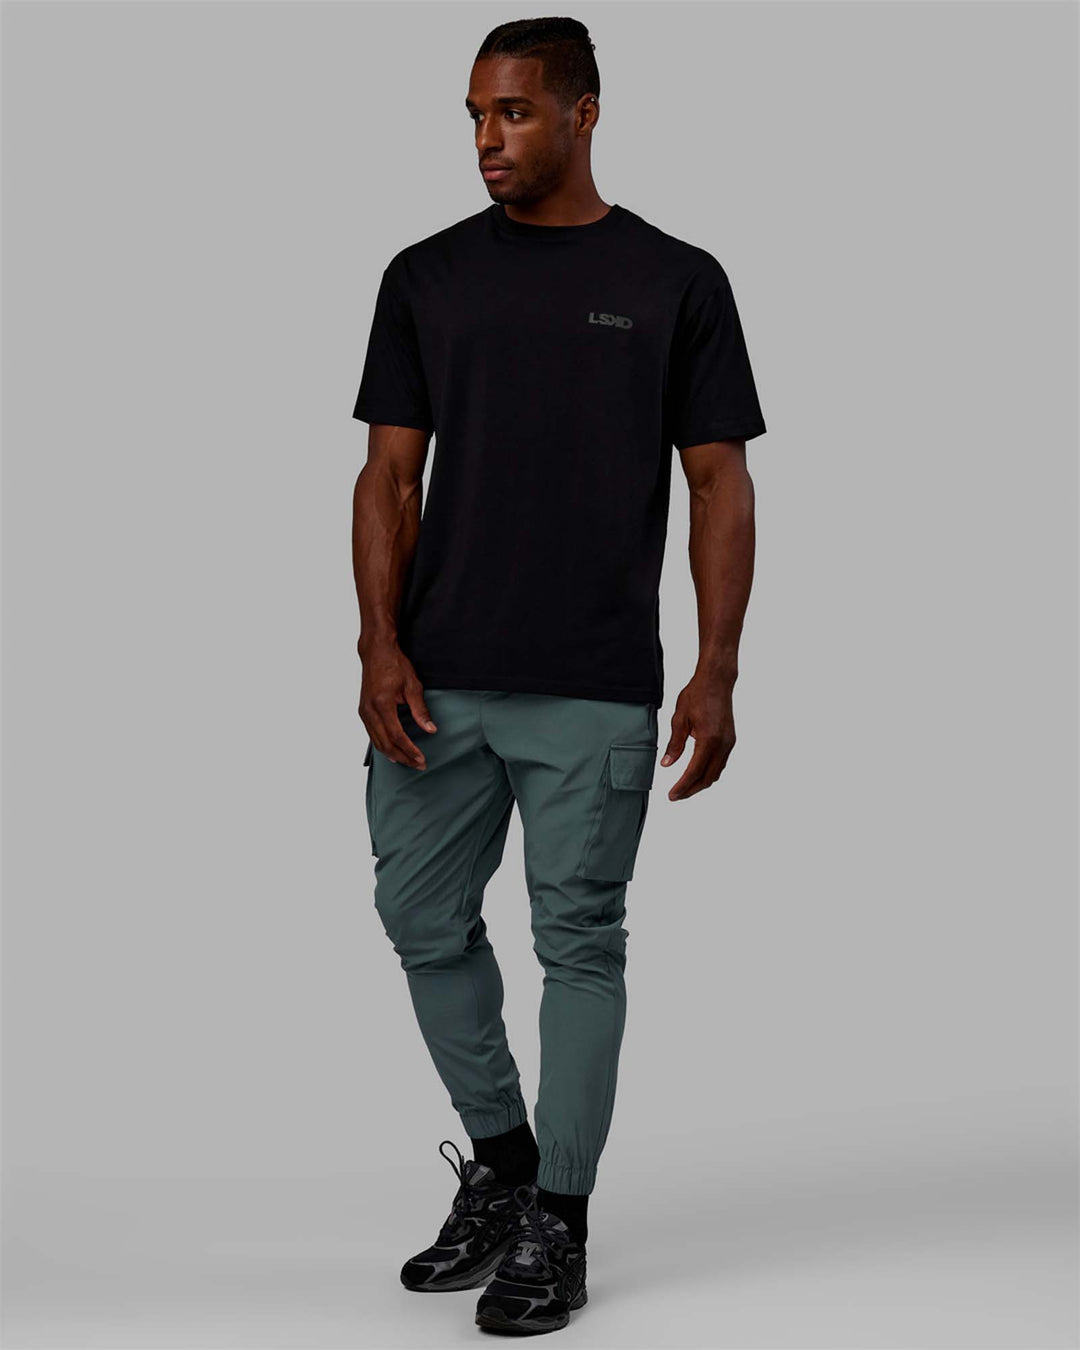 Man wearing Energy Stretch Performance Cargo Joggers - Storm